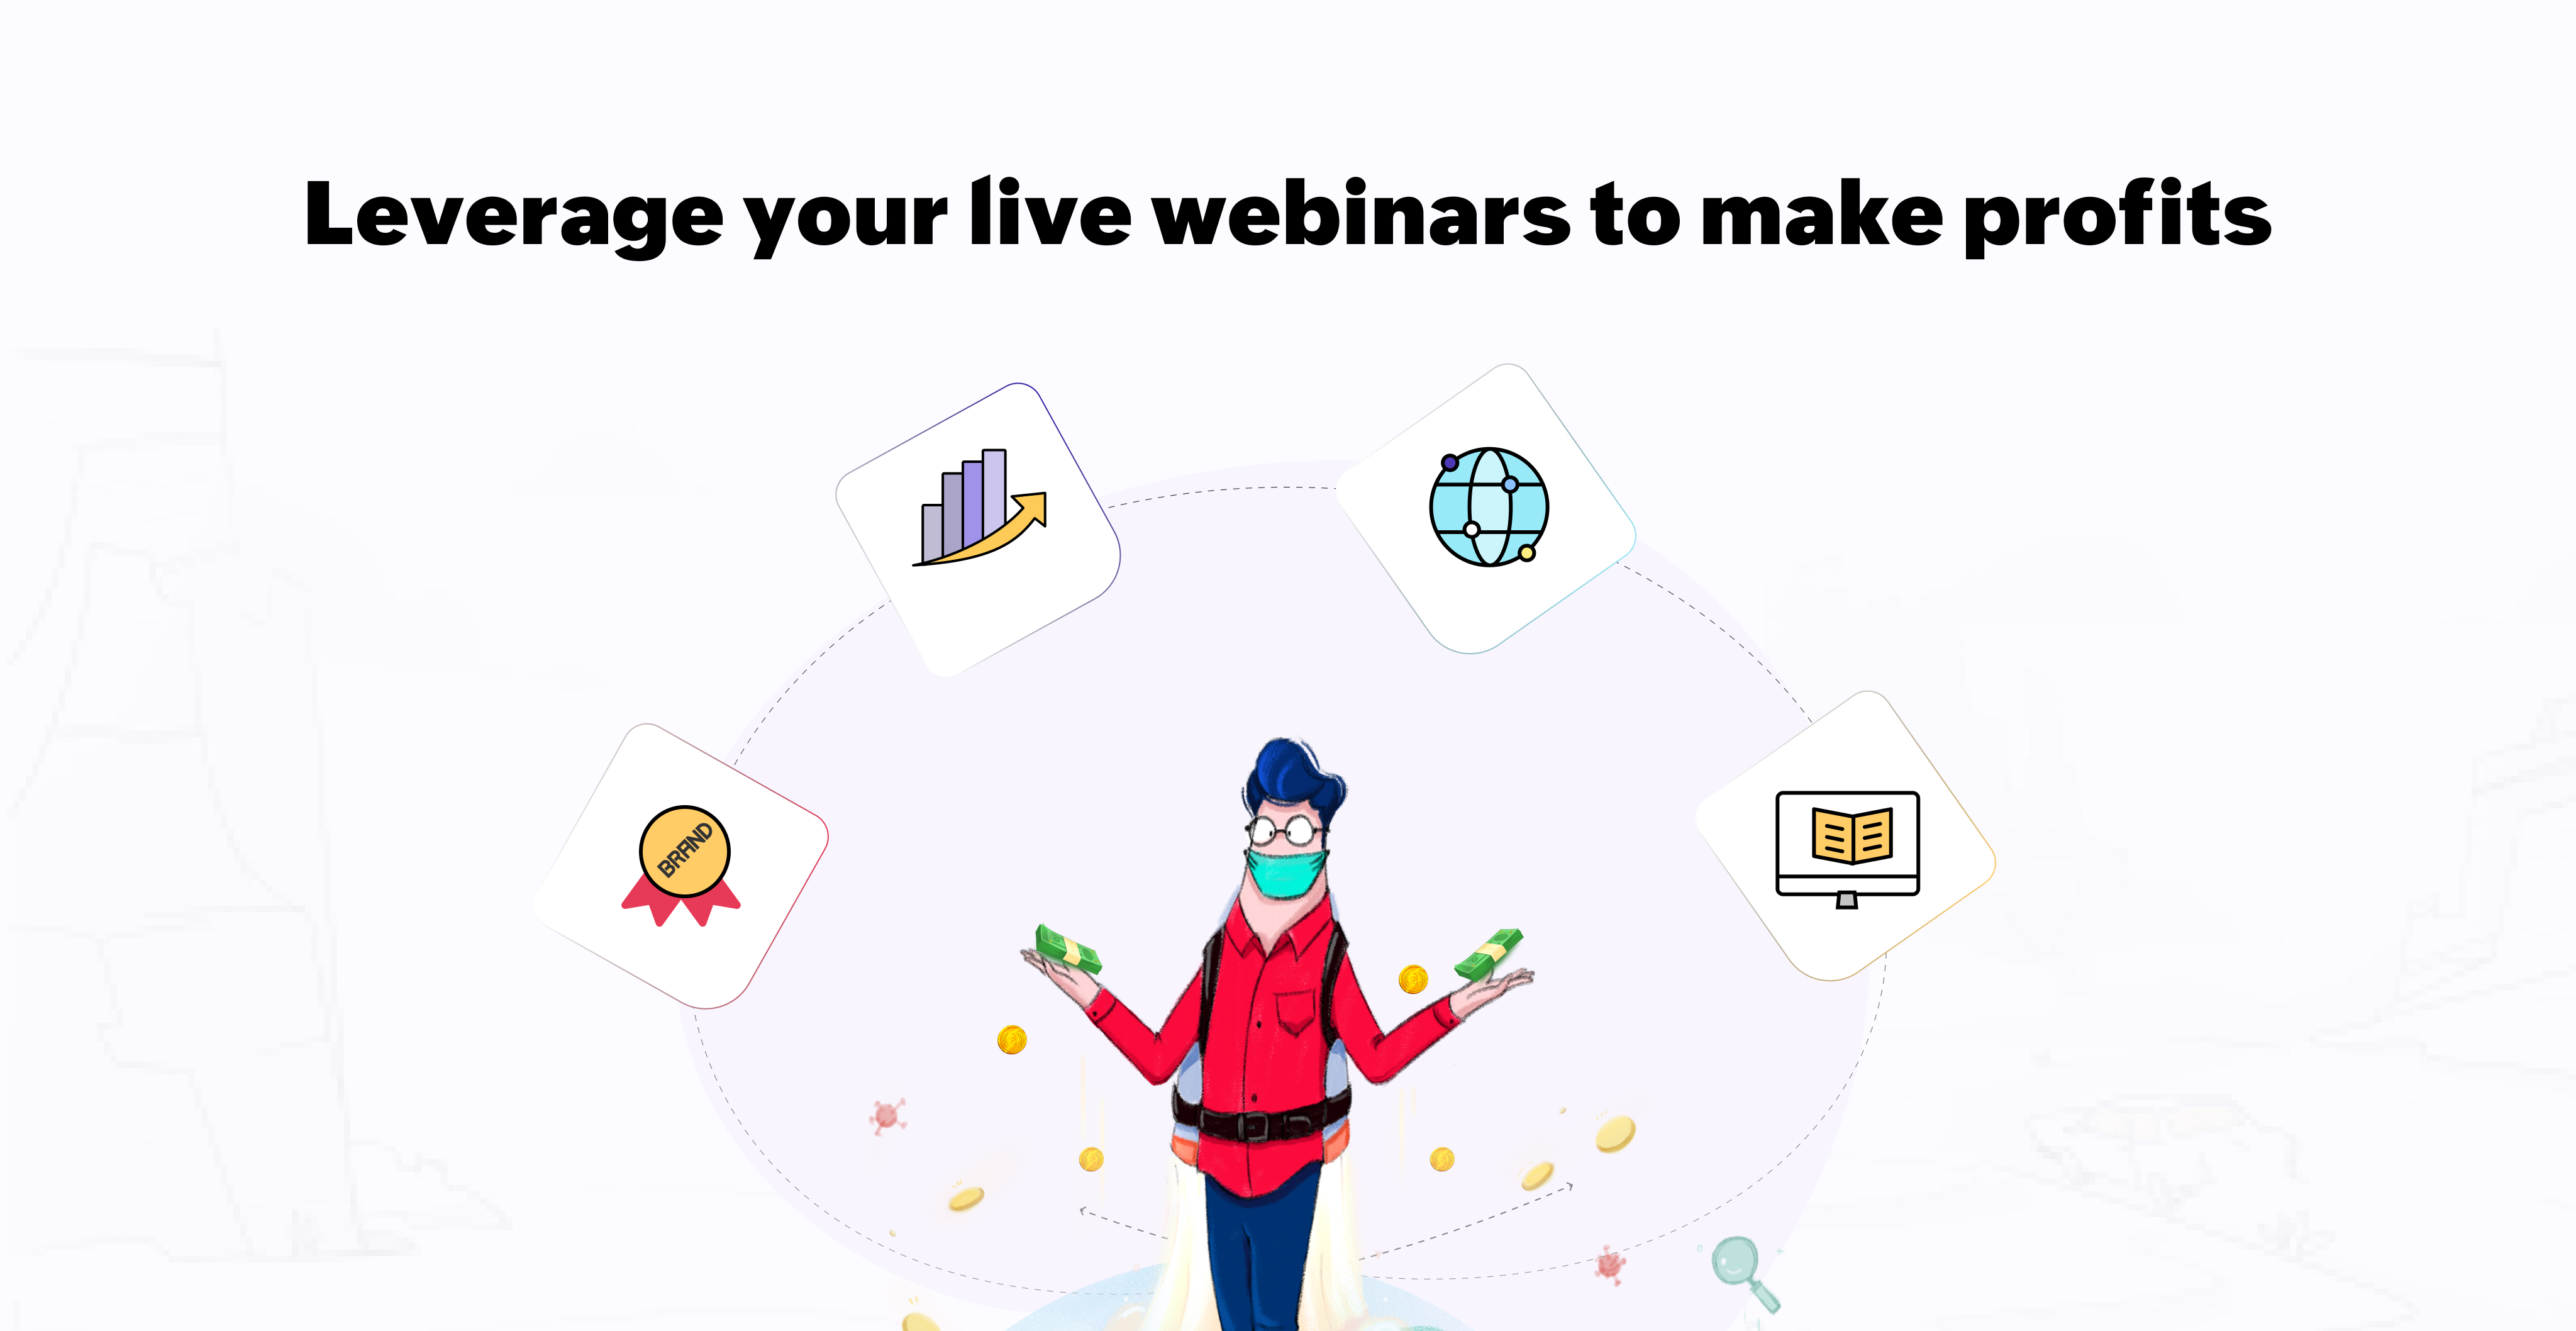 Benefits of live streaming your webinar